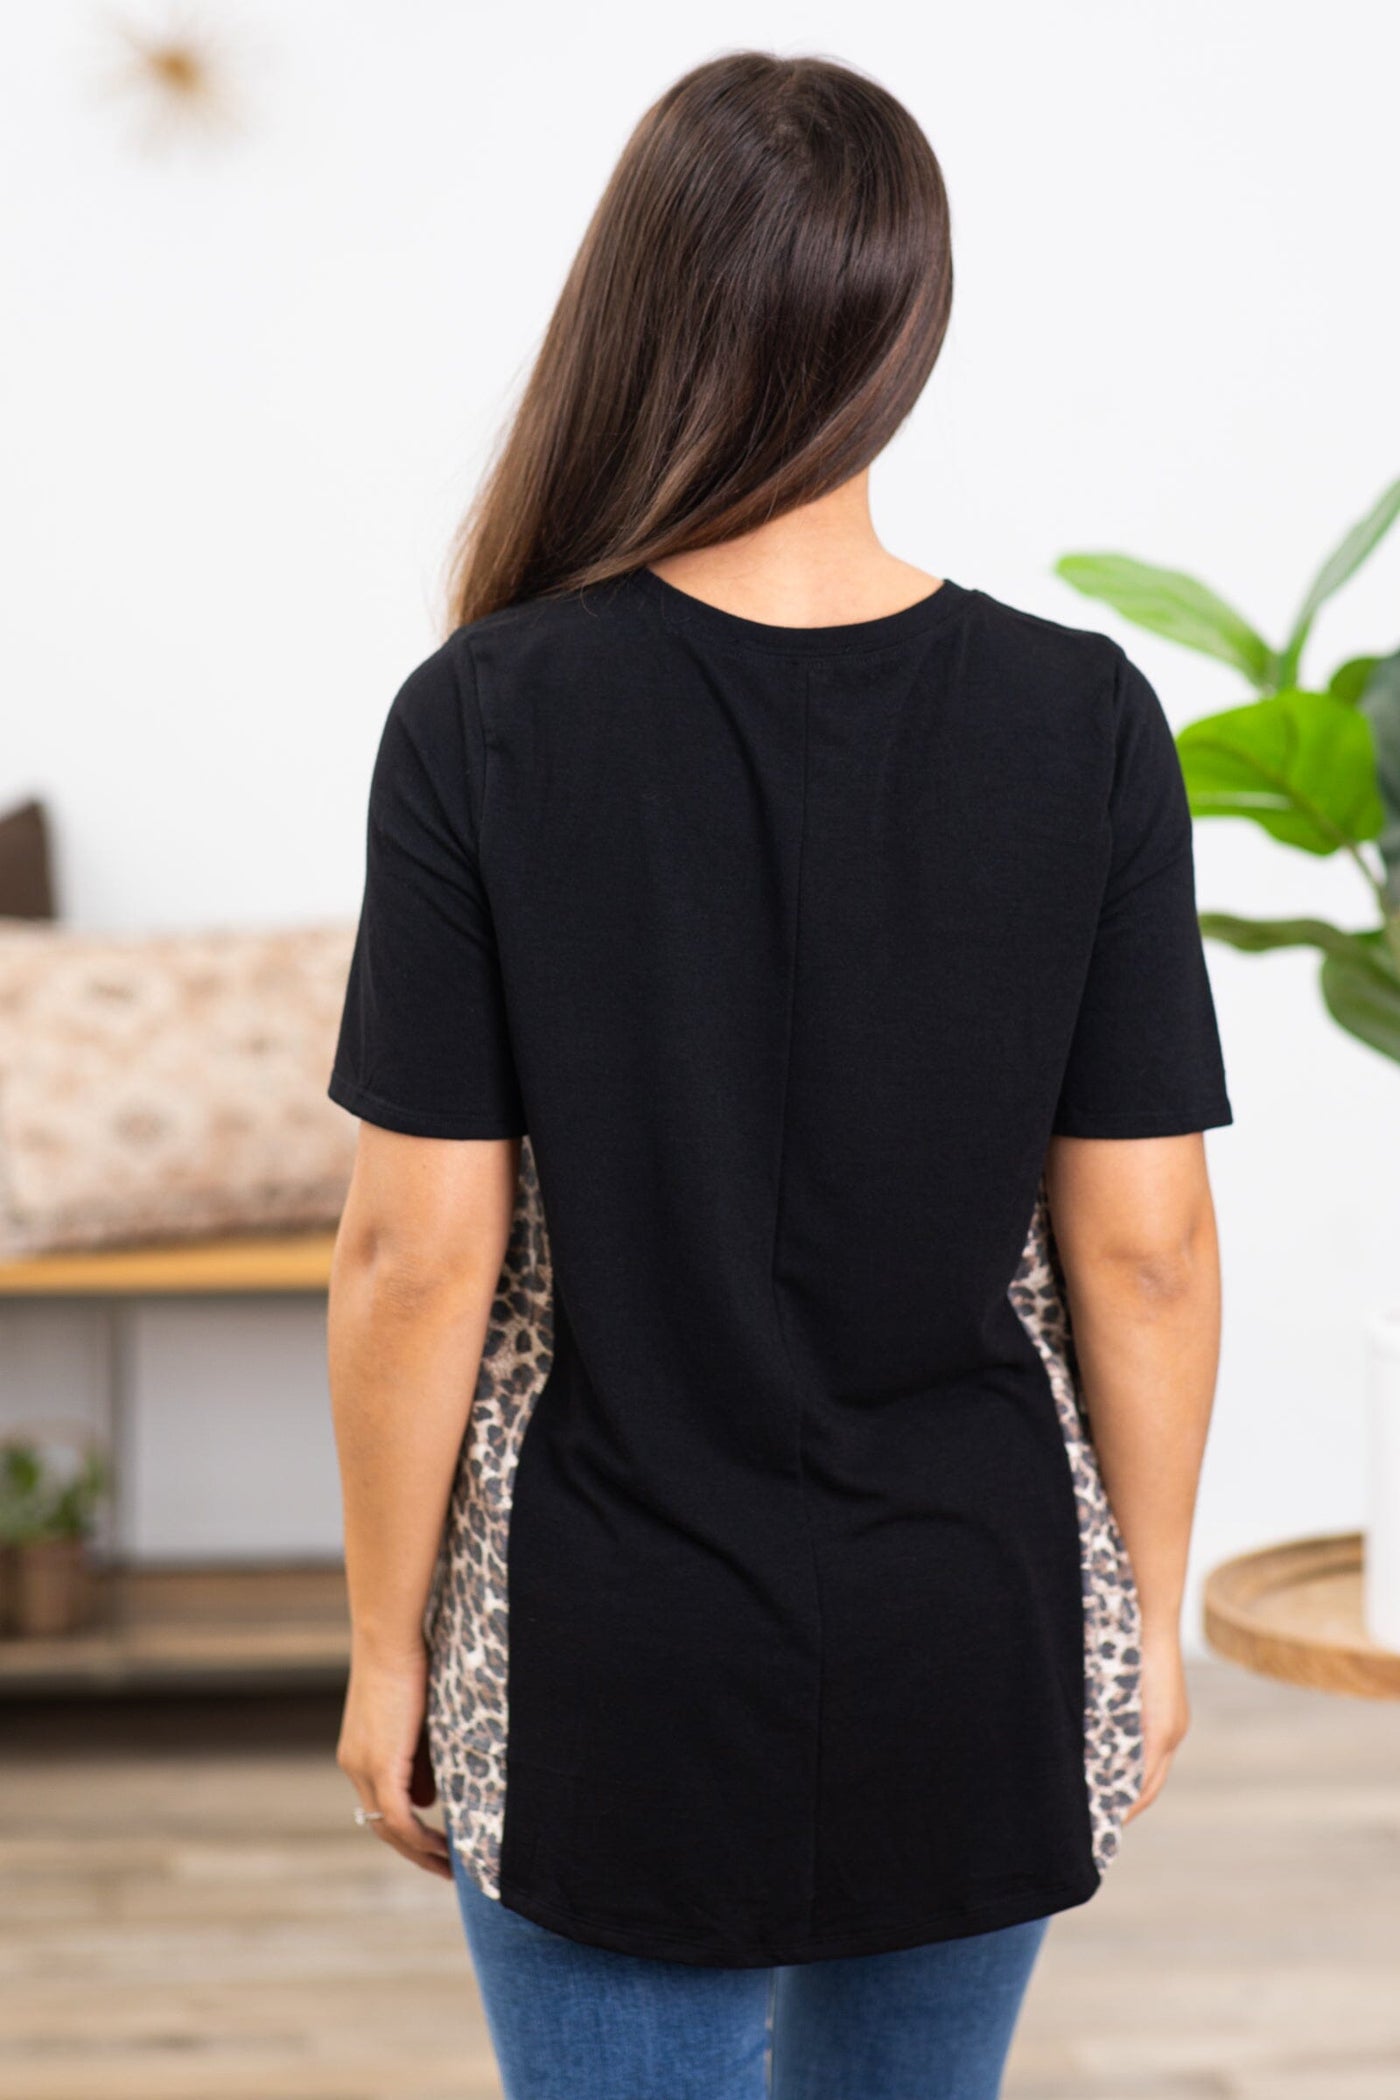 Black Animal Print Back Top With Pocket - Filly Flair